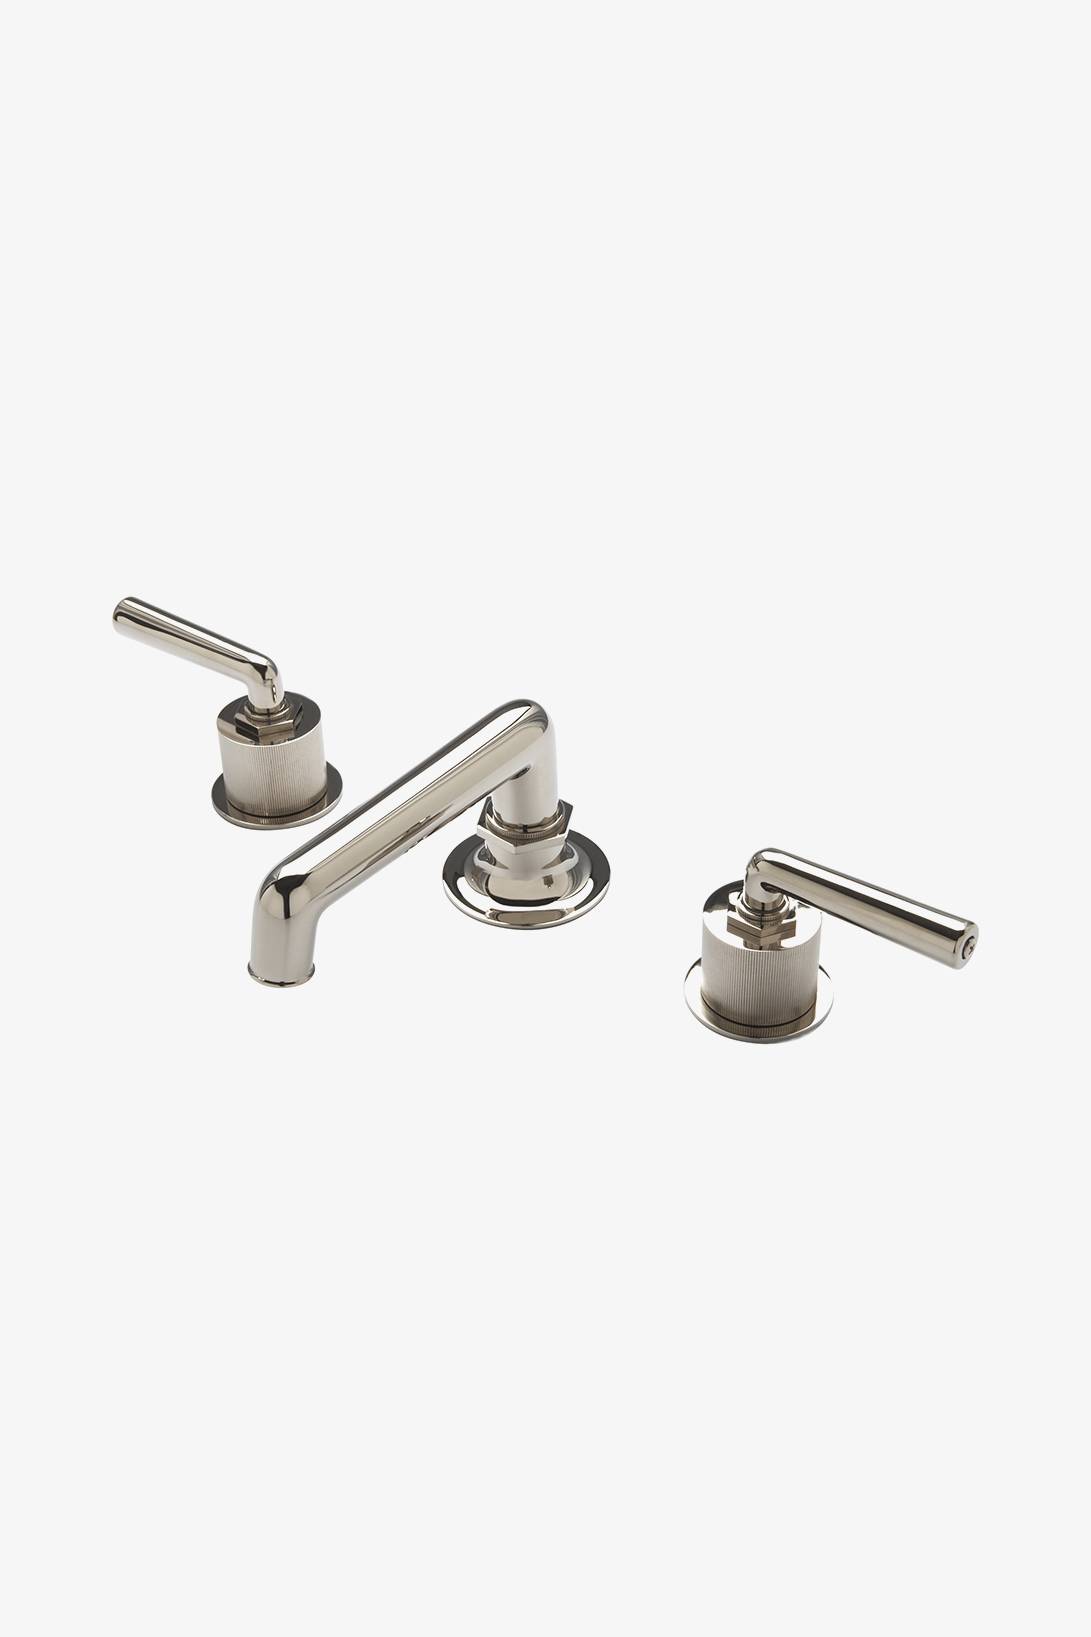 Henry Deck Mounted Lavatory Faucet